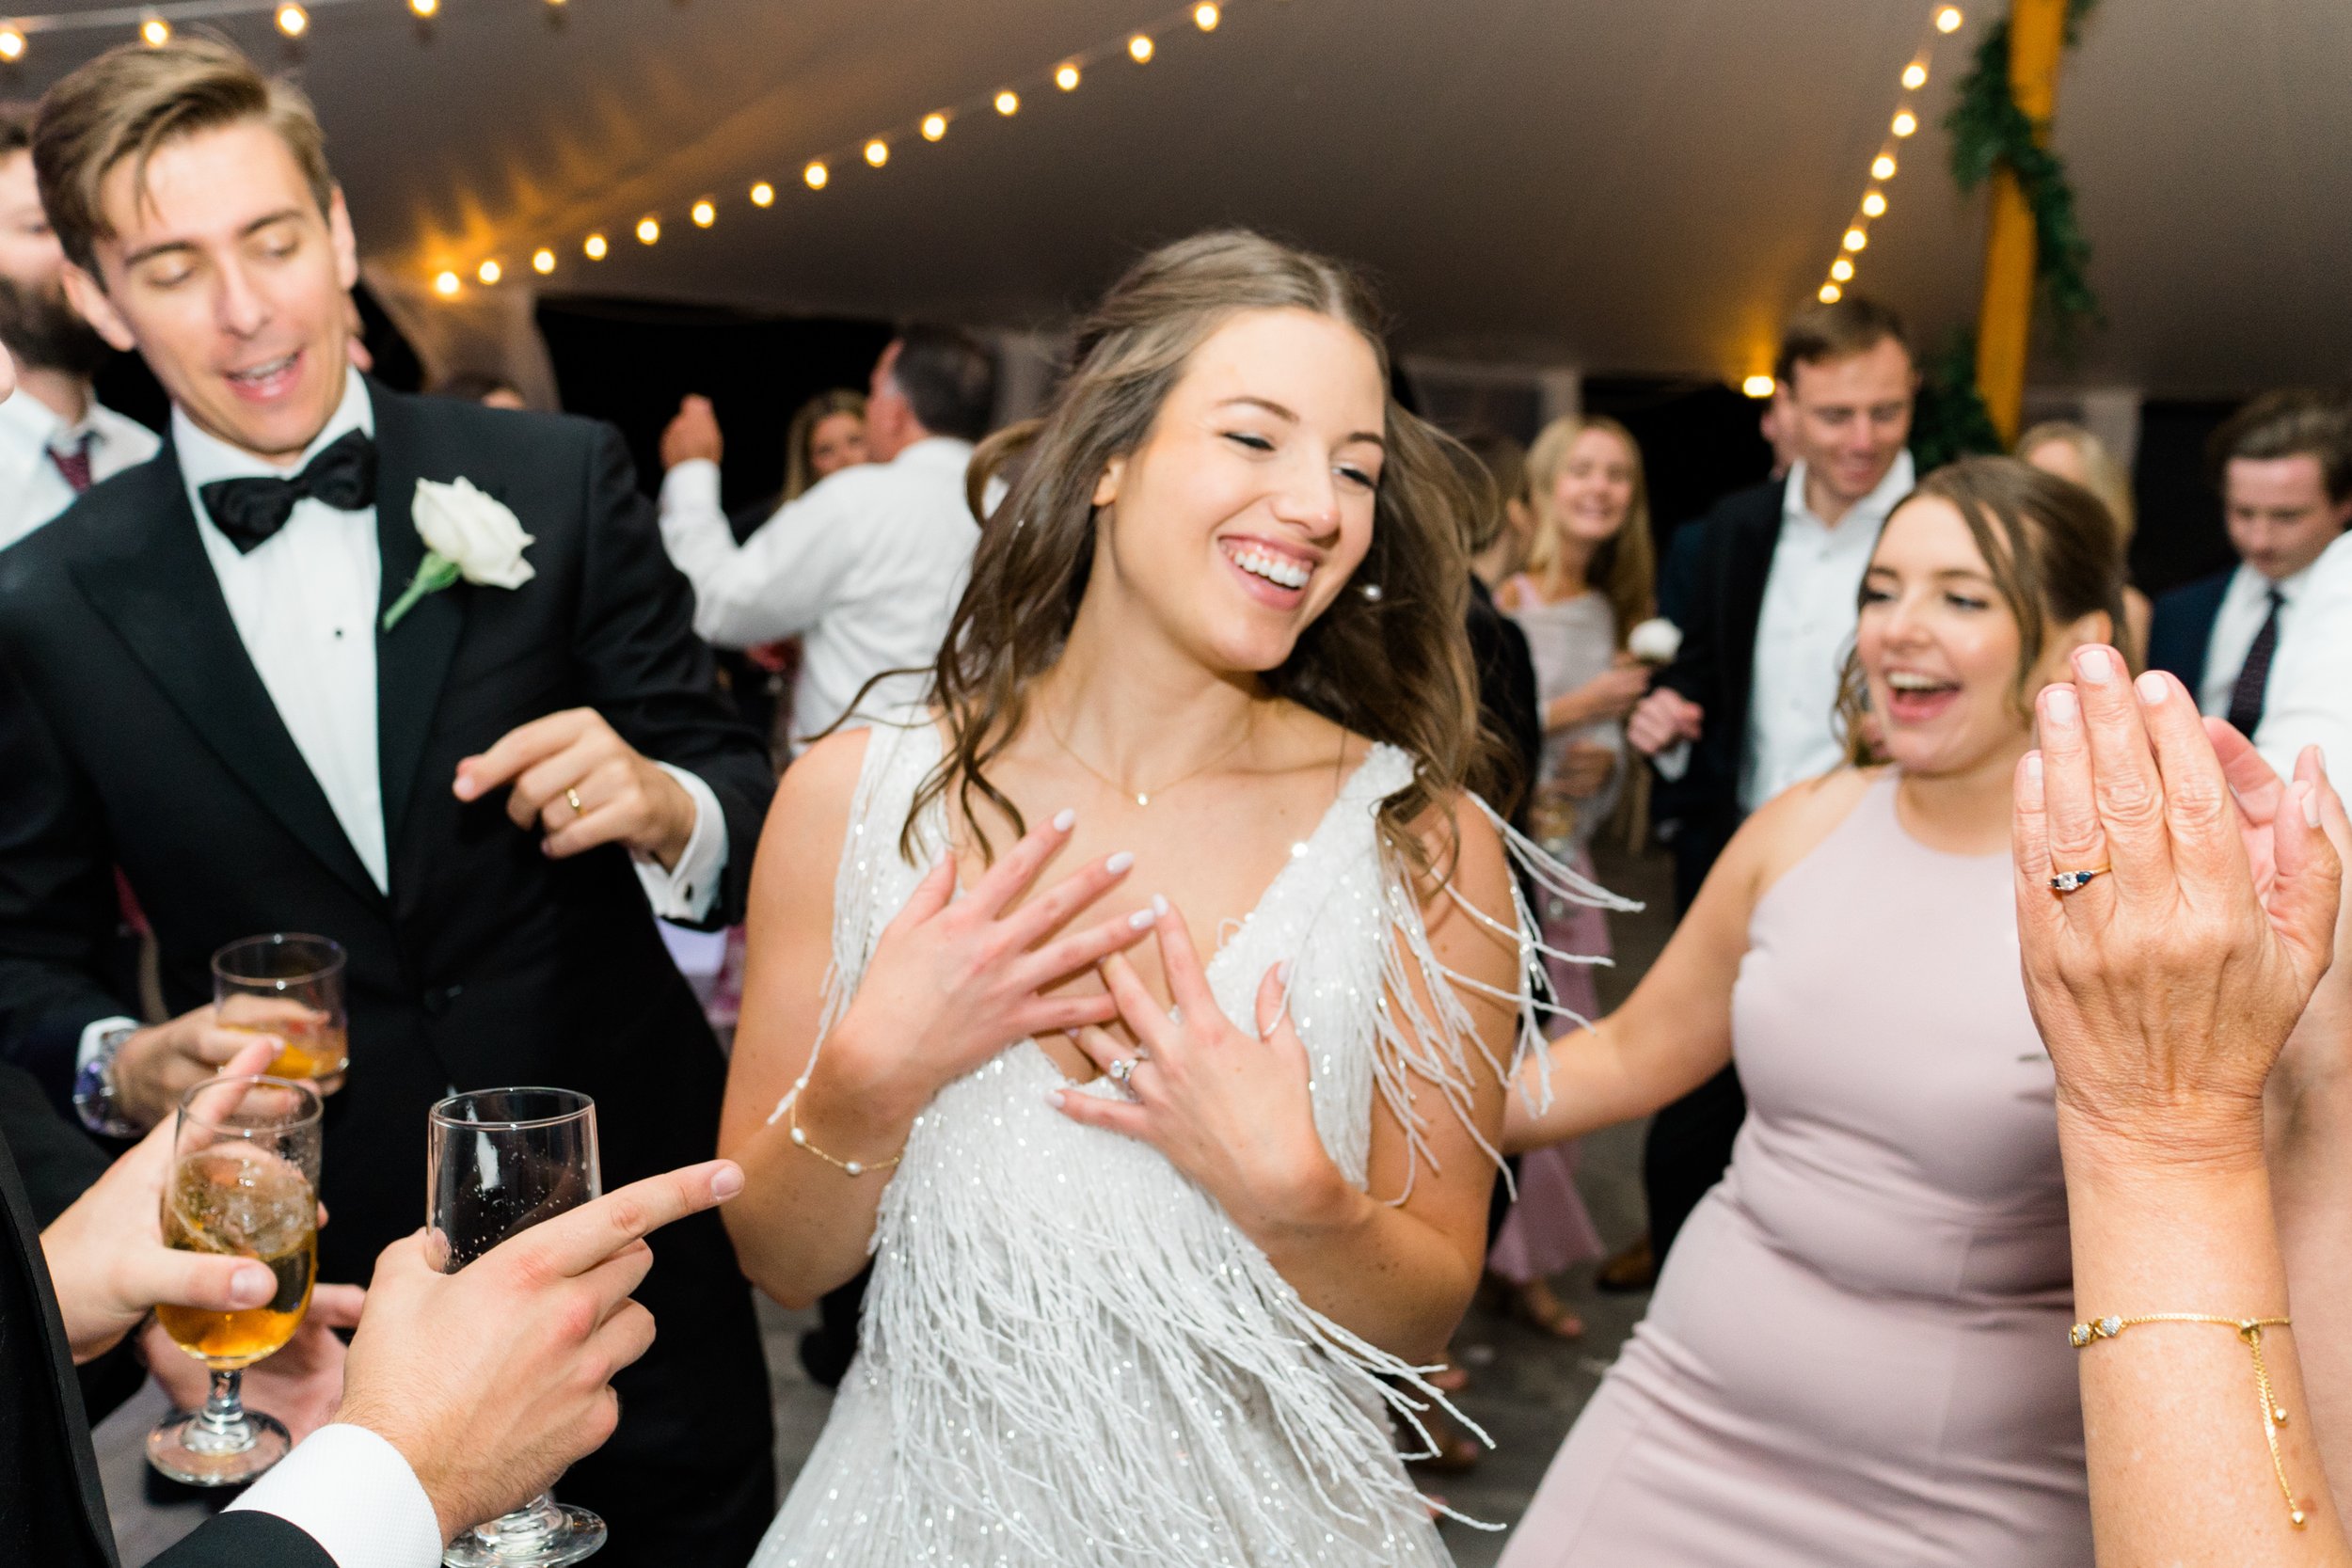 Candid dance floor photo of bride holding her heart and smiling while beaded dress flows behind her.